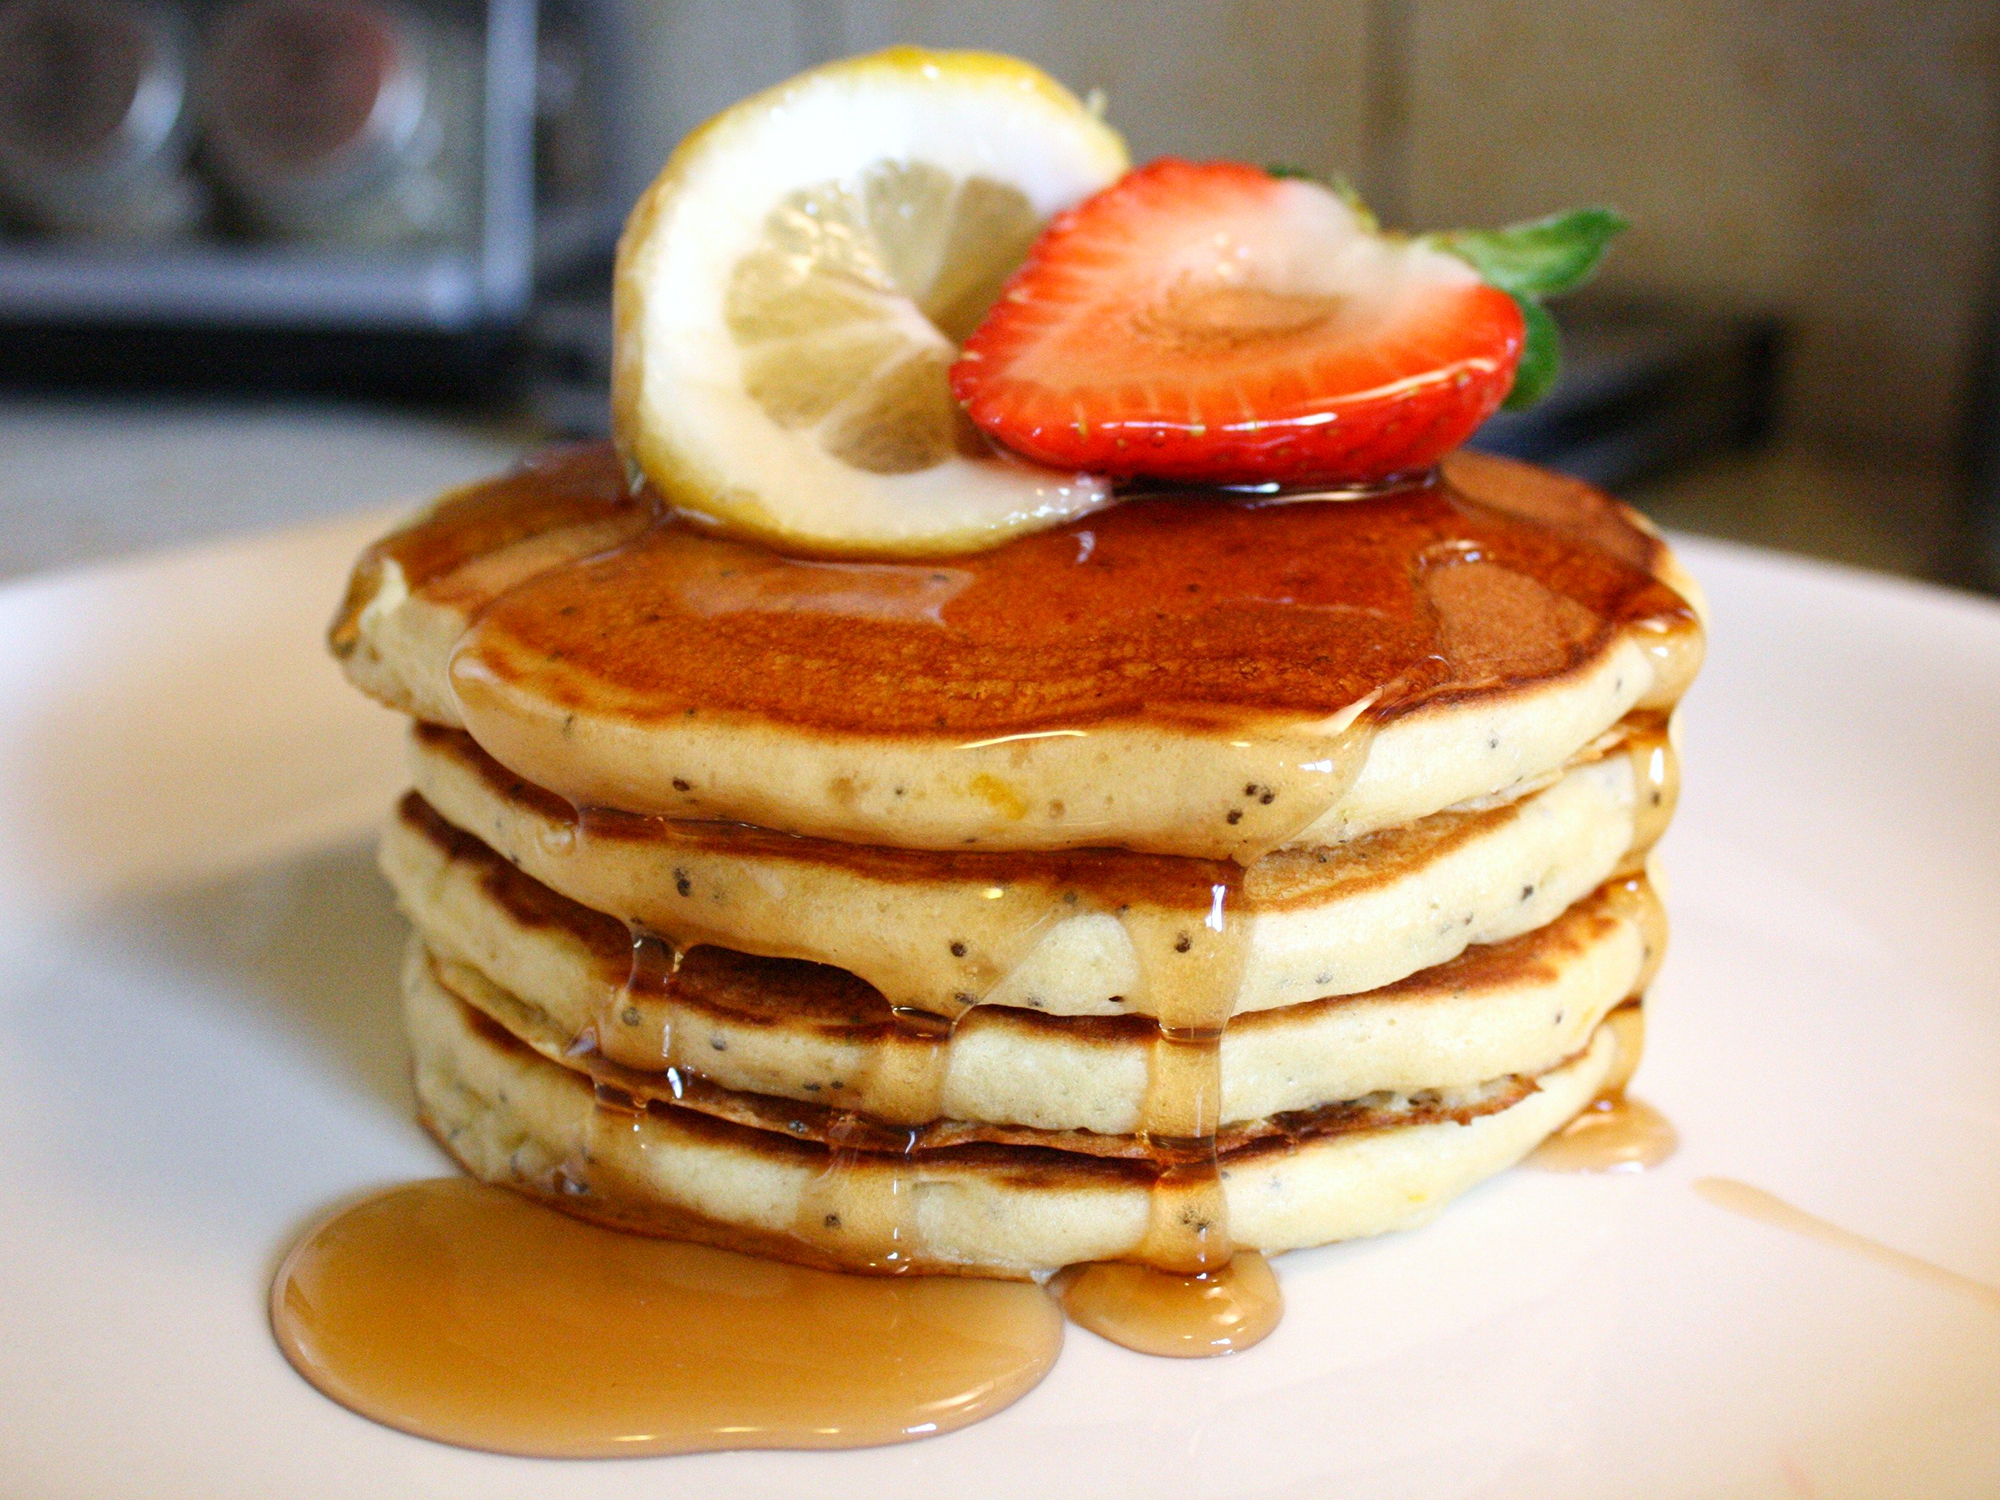 close up view of Sunday Morning Lemon Poppy Seed Pancakes garnished with syrup, strawberry and lemon on a plate